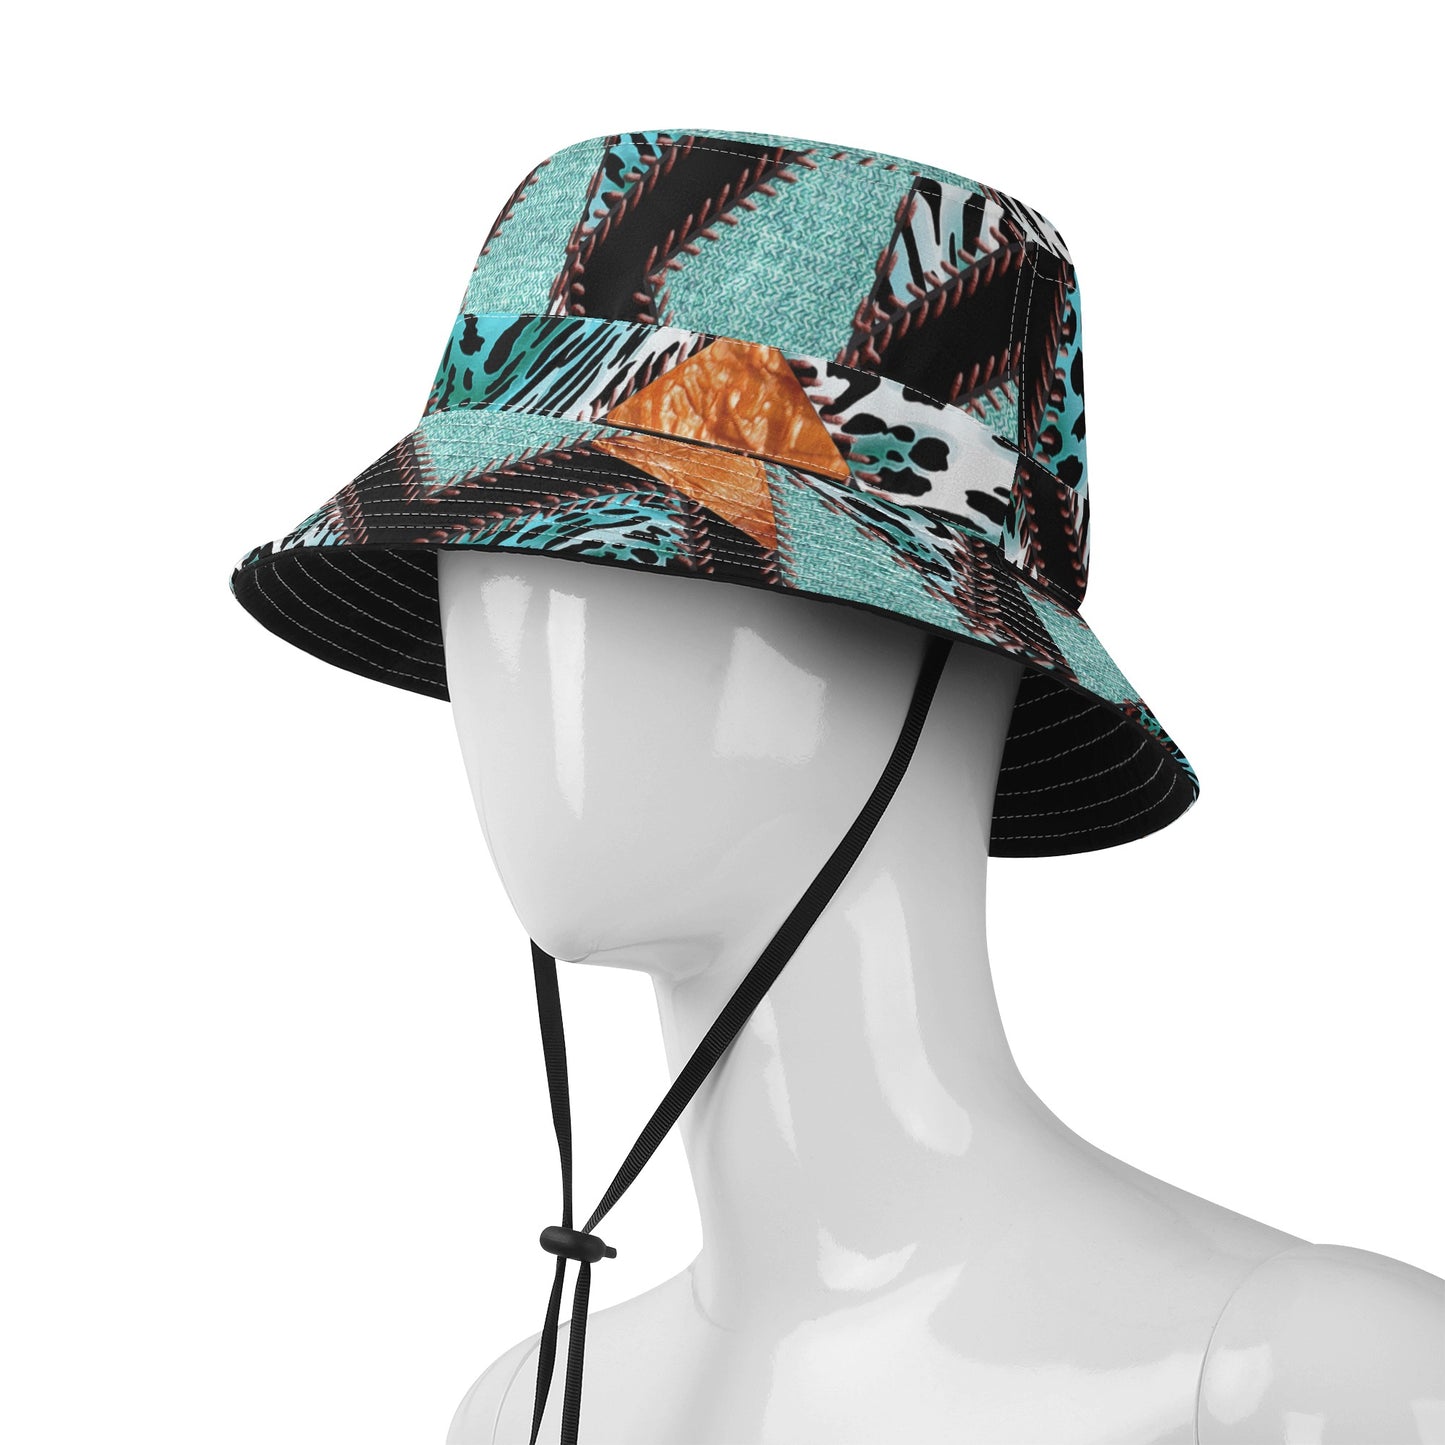 Patchwork Fishermans Hat, Keeping the Sun of the Skull